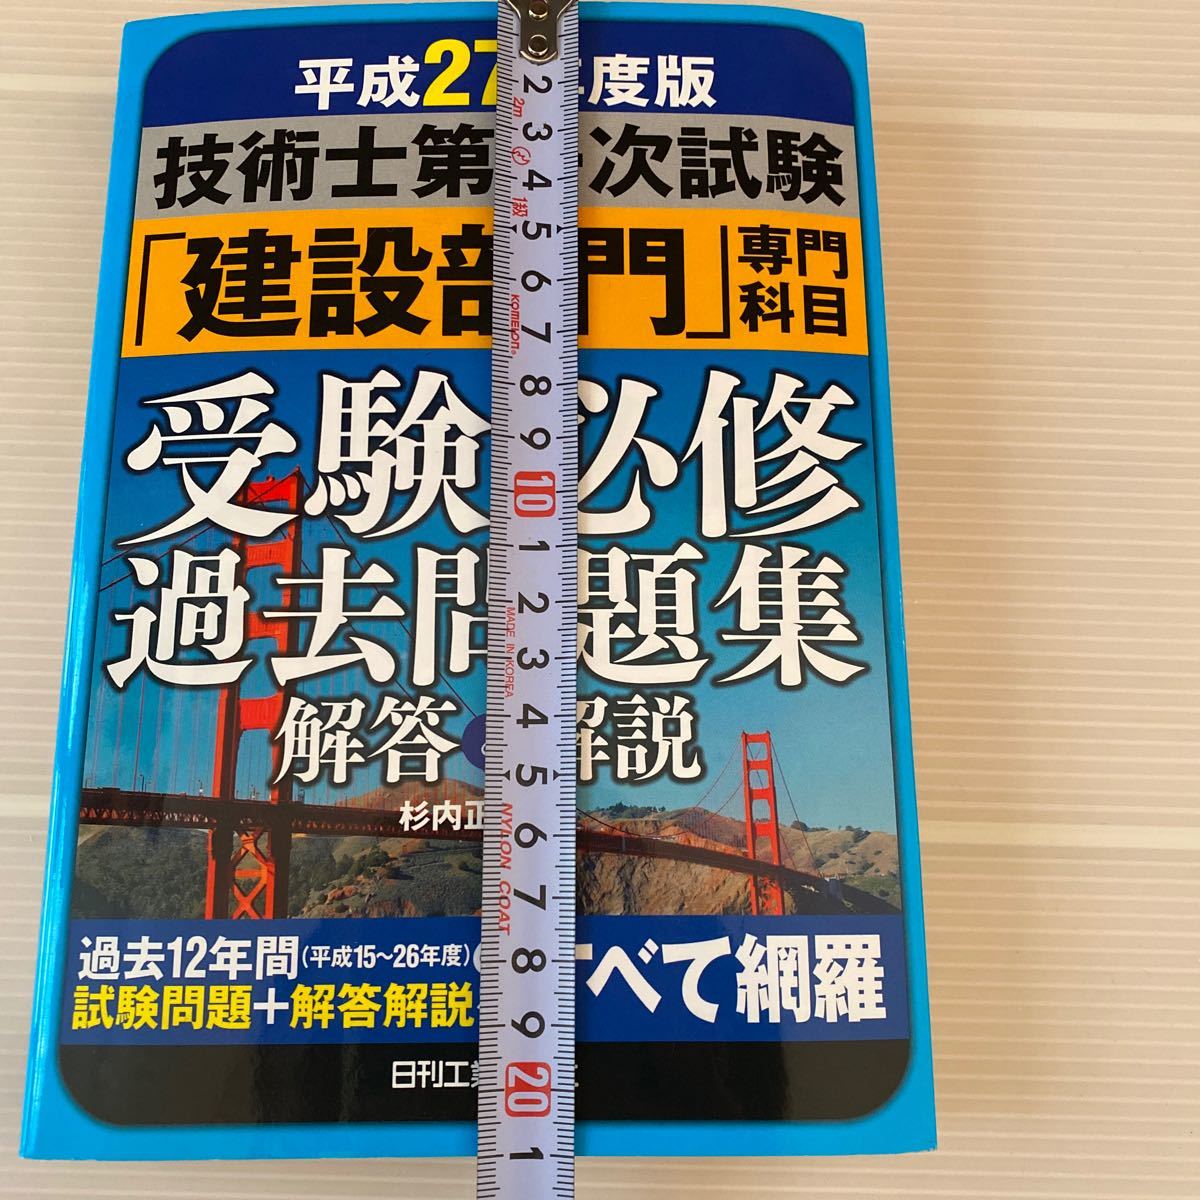  technology . the first next examination Heisei era 27 fiscal year edition construction group day . industry newspaper company Japanese cedar inside regular . past problem Heisei era 15~26 fiscal year 12 years examination problem + answer explanation all net .438 page 